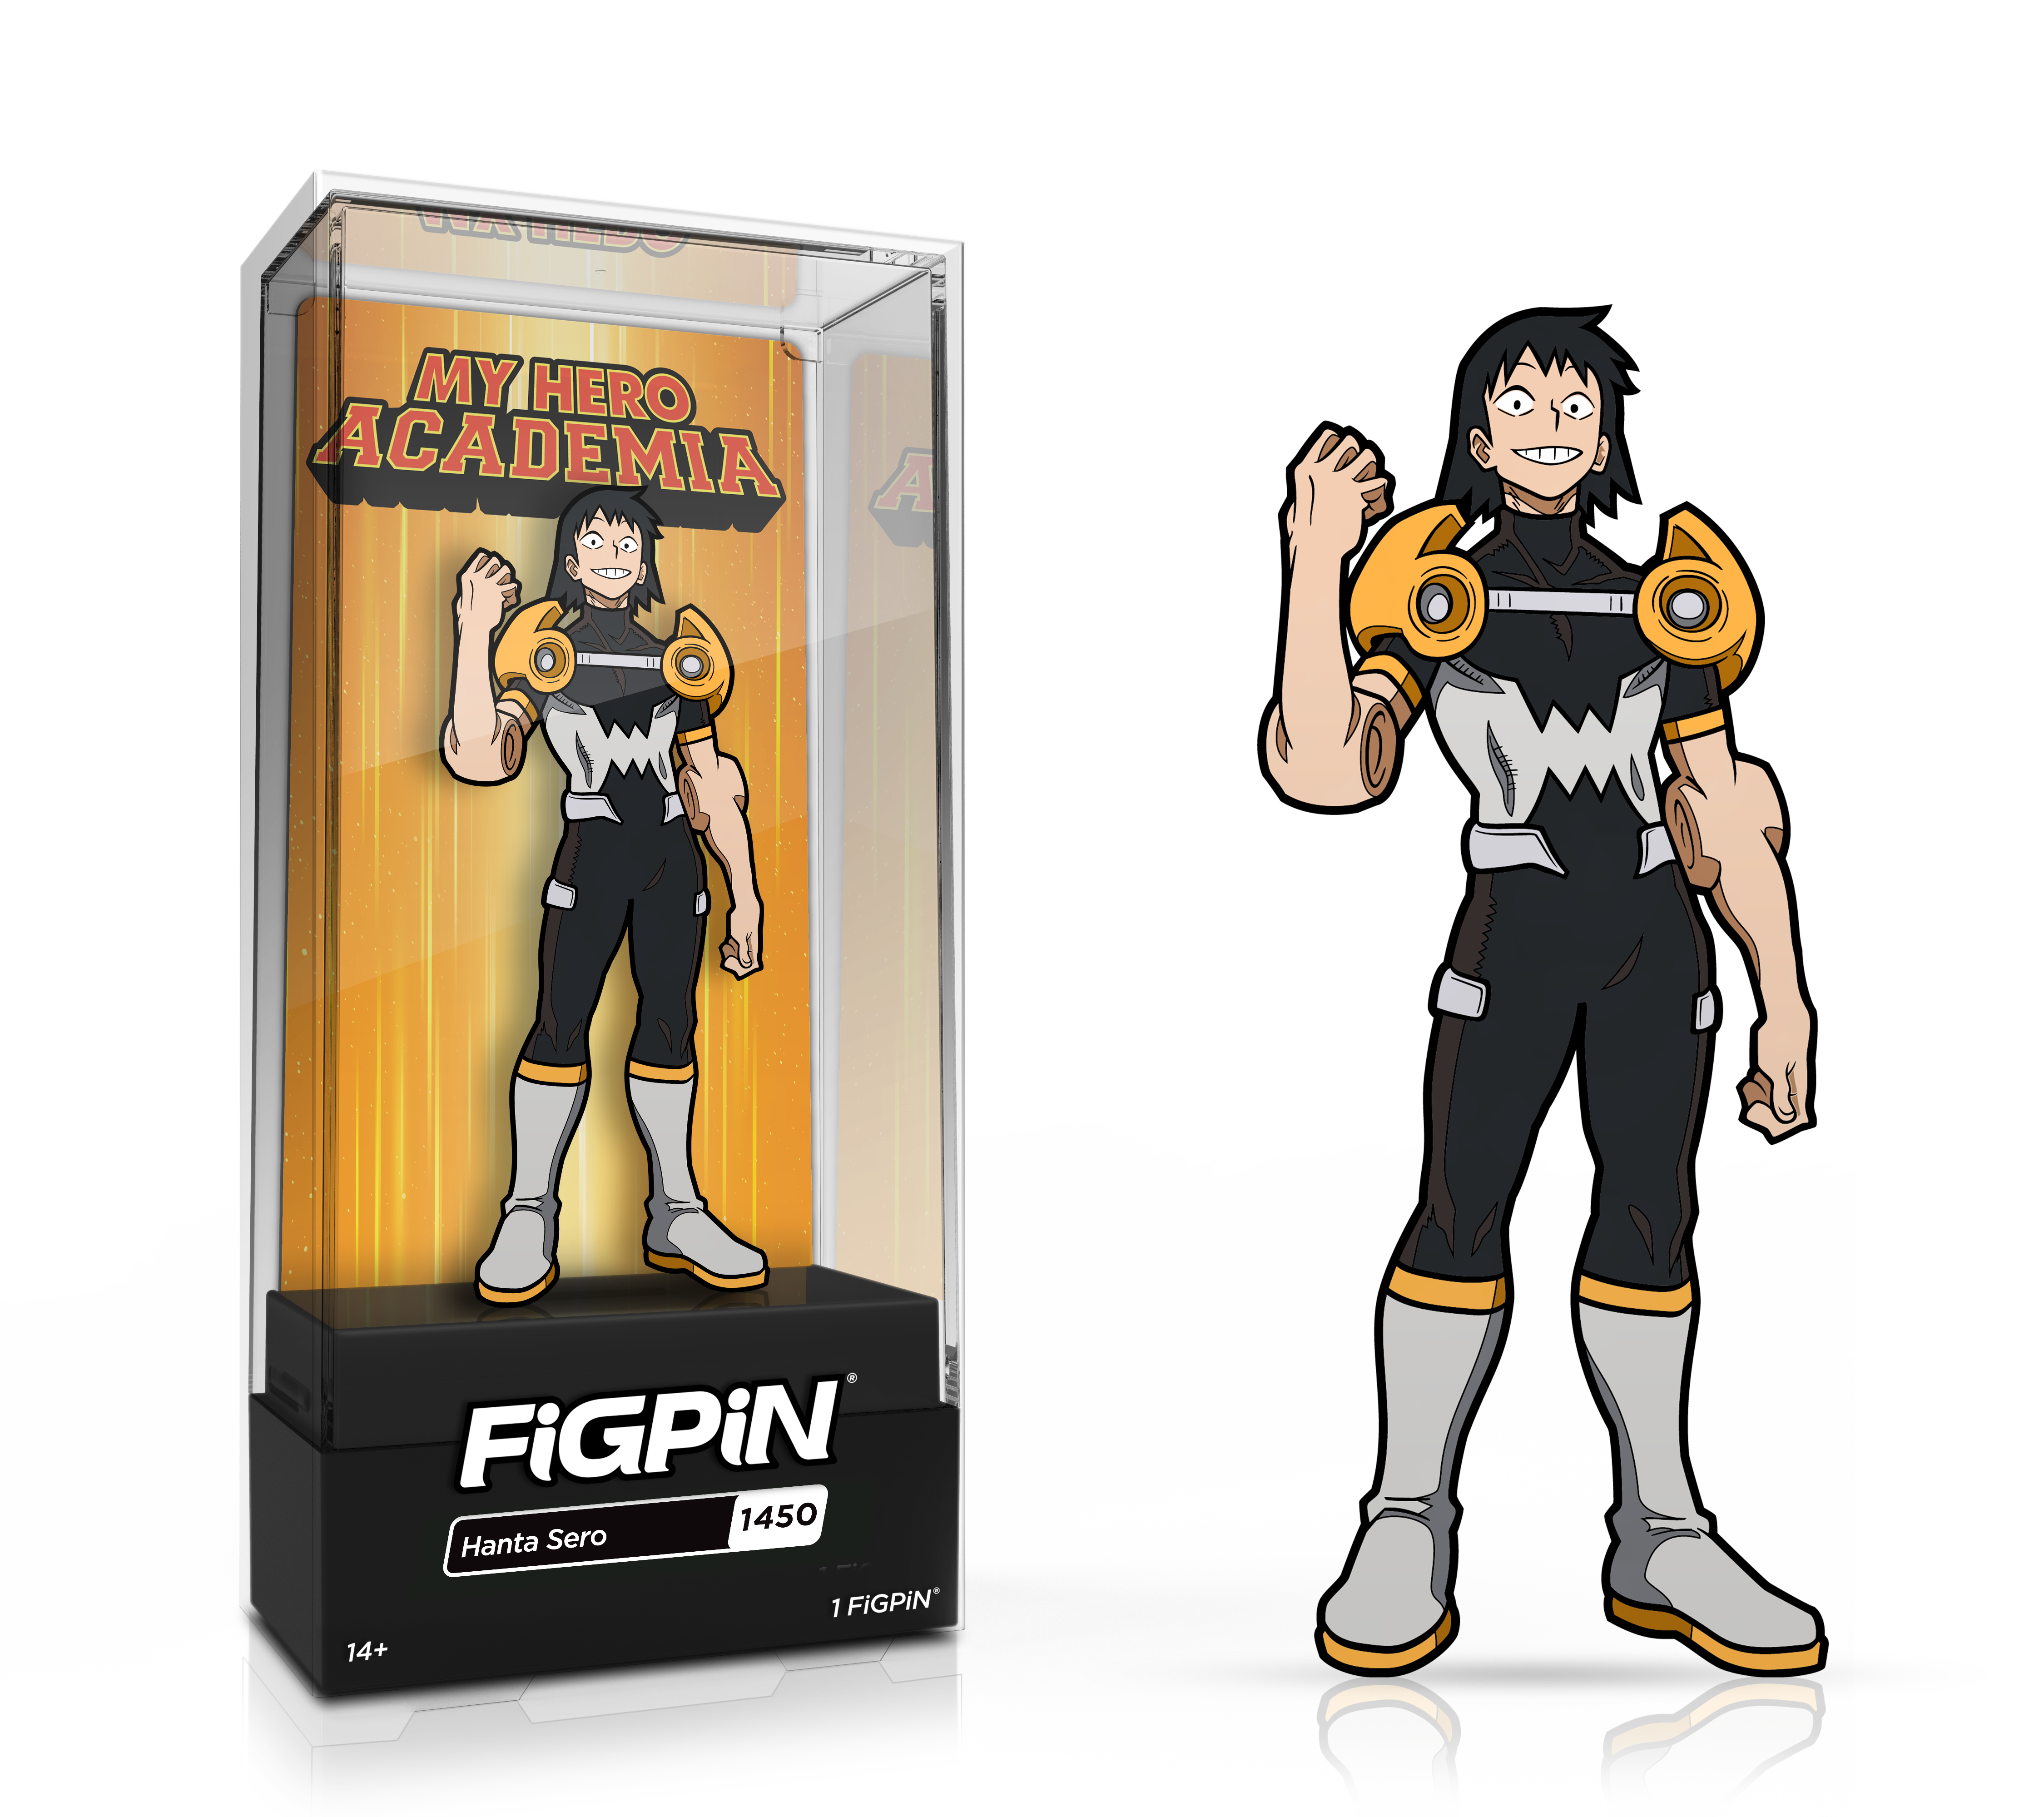 Side by side view of the Hanta Sero enamel pin in display case and the art render.